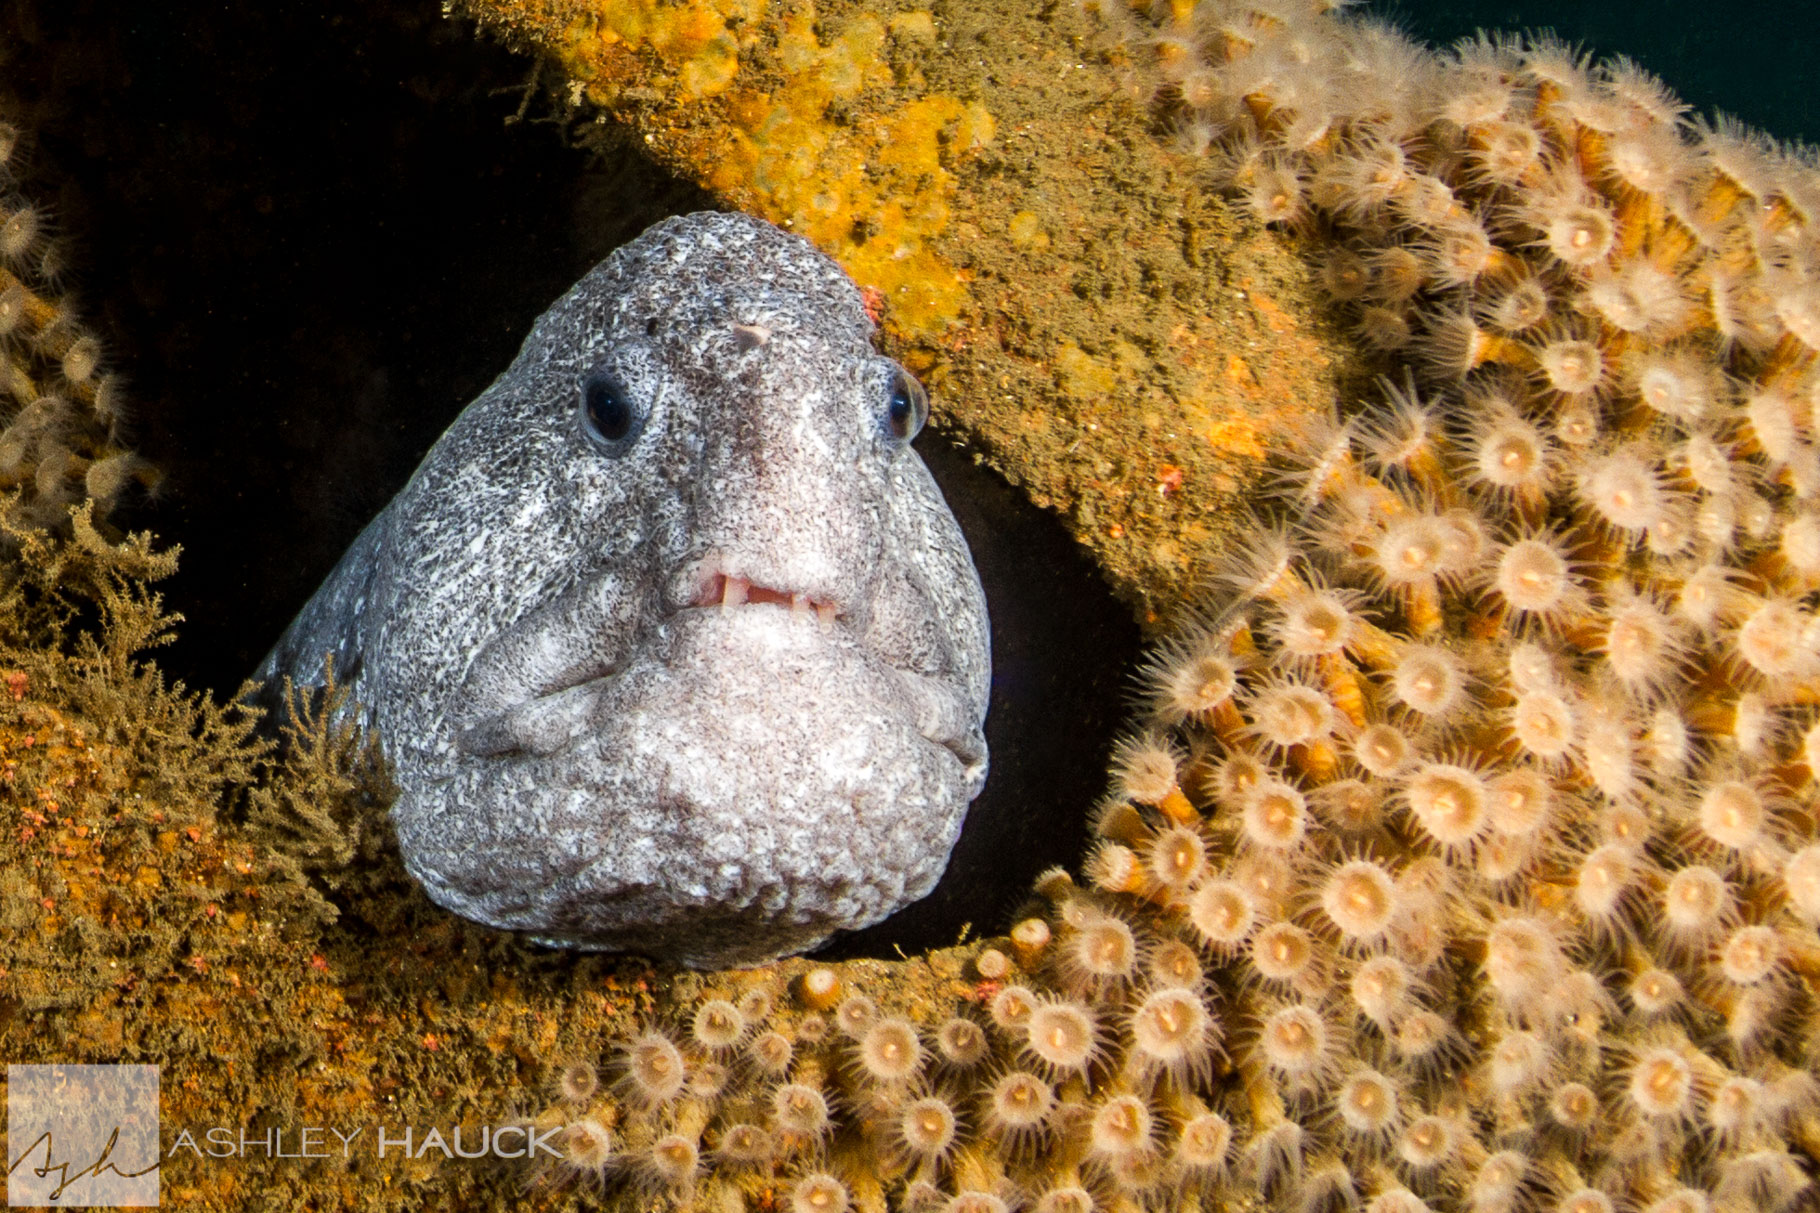 A wolf eel living in the wreckage of the UB-88 submarine wreck